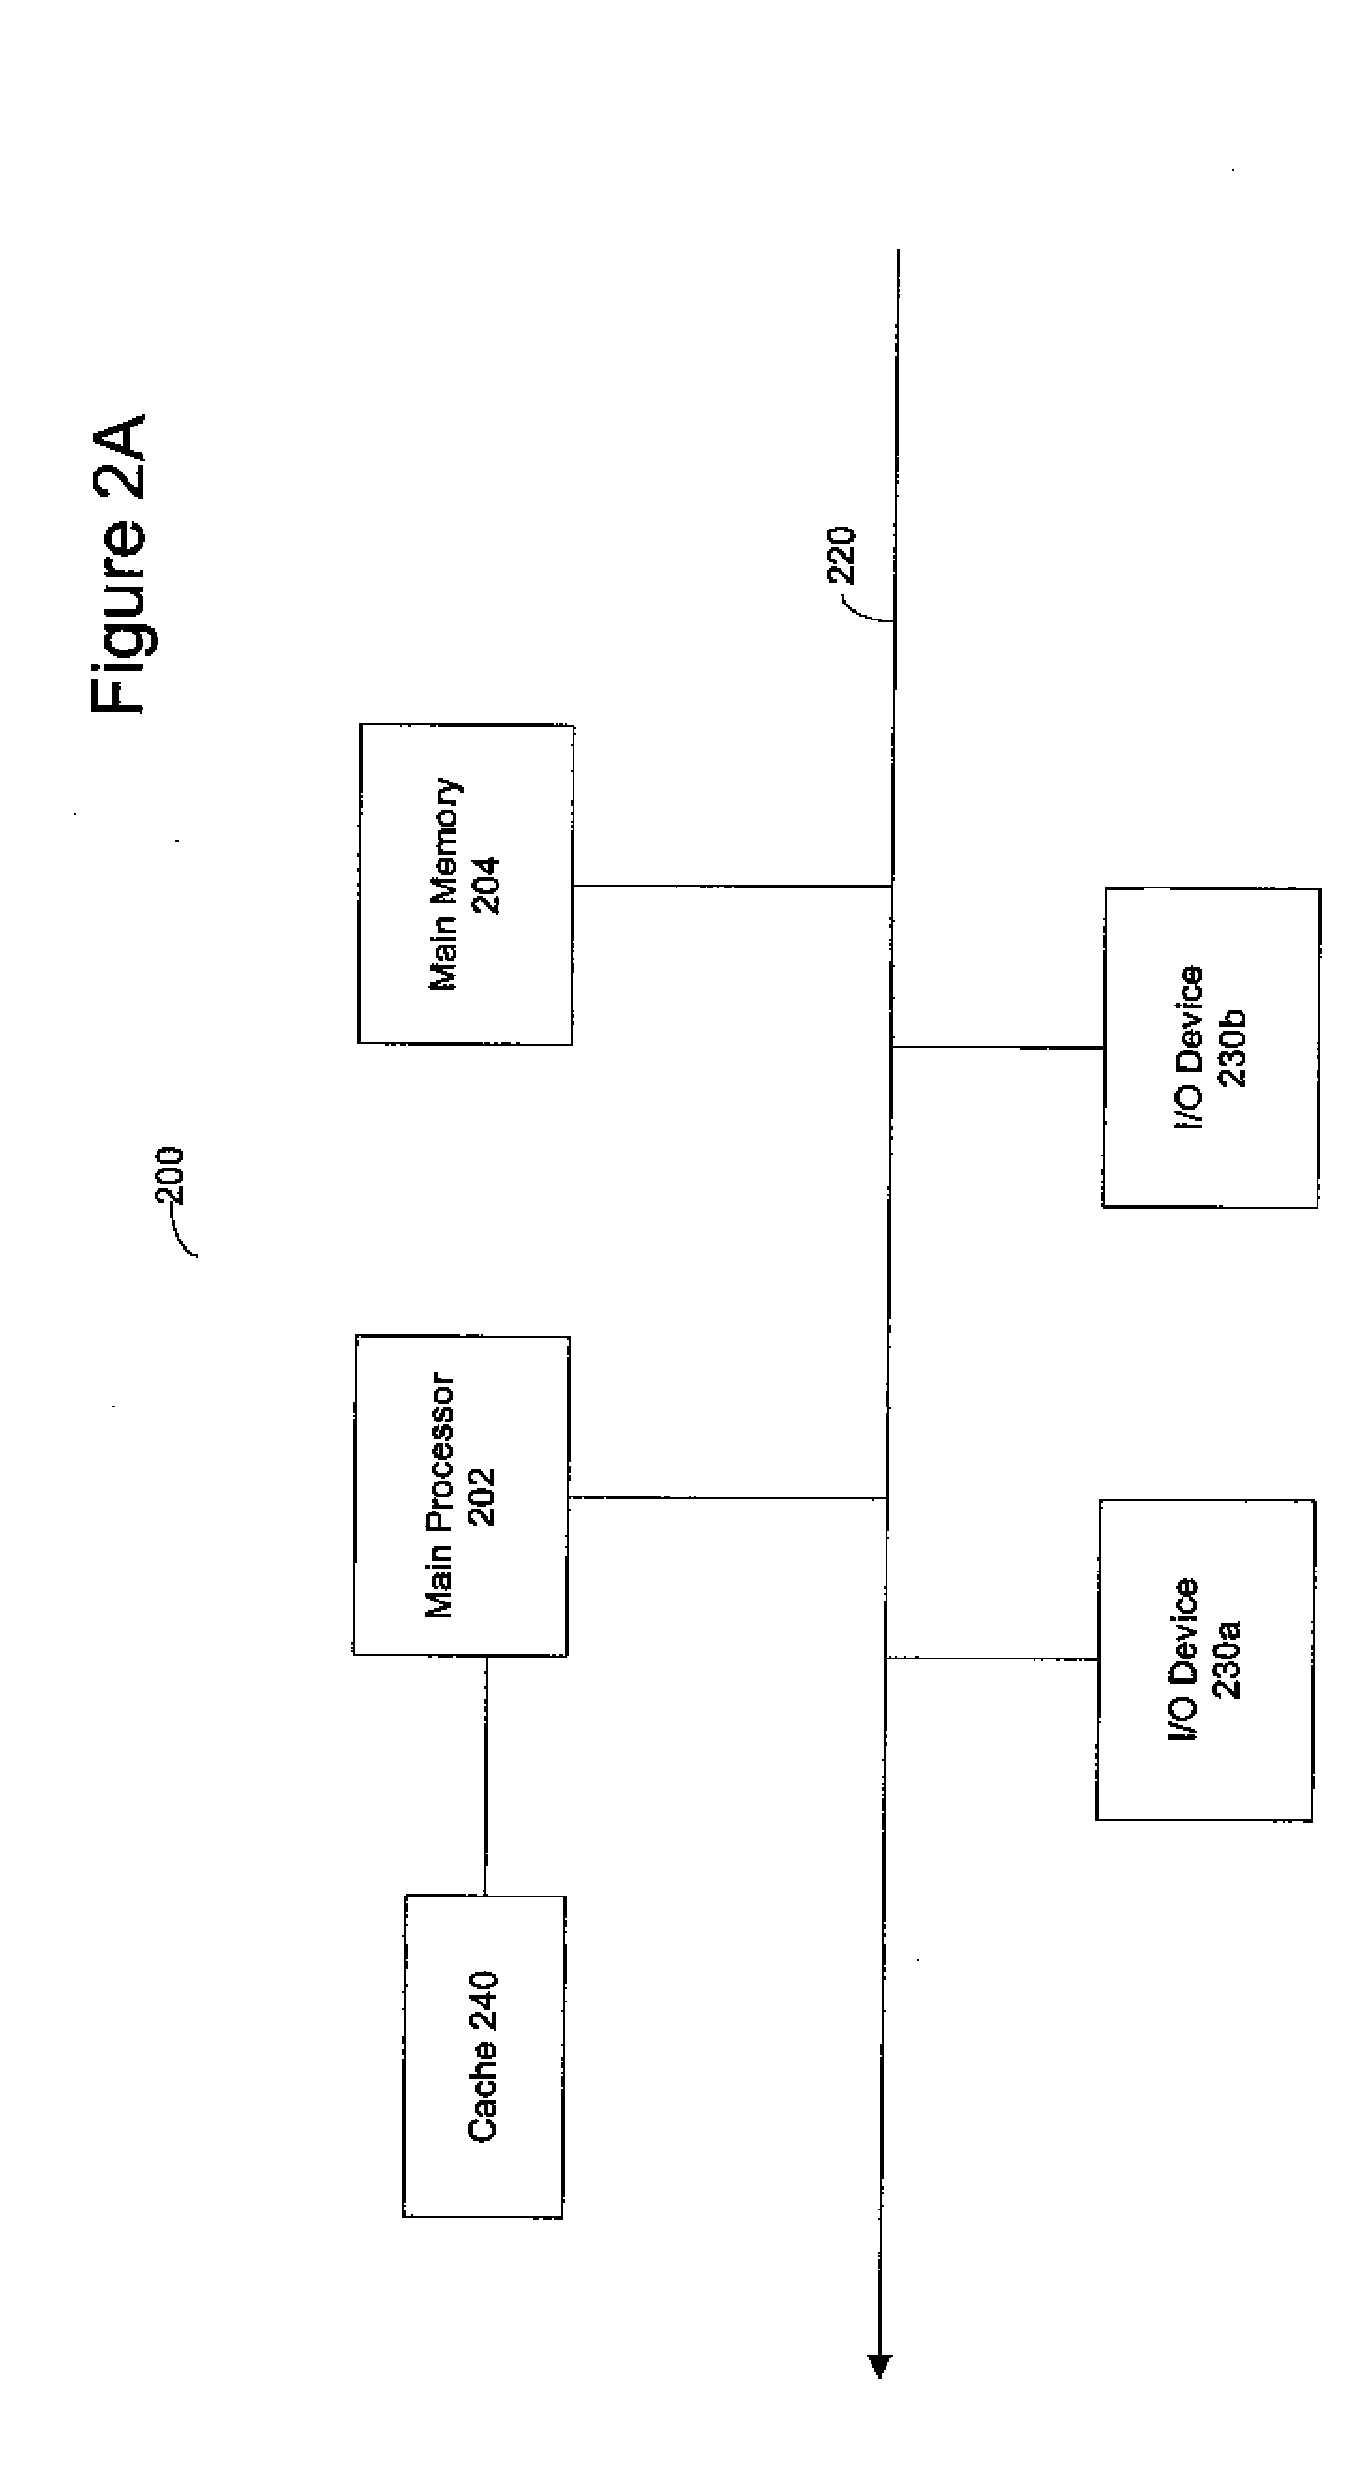 A system and method for executing interactive applications with minimal privileges